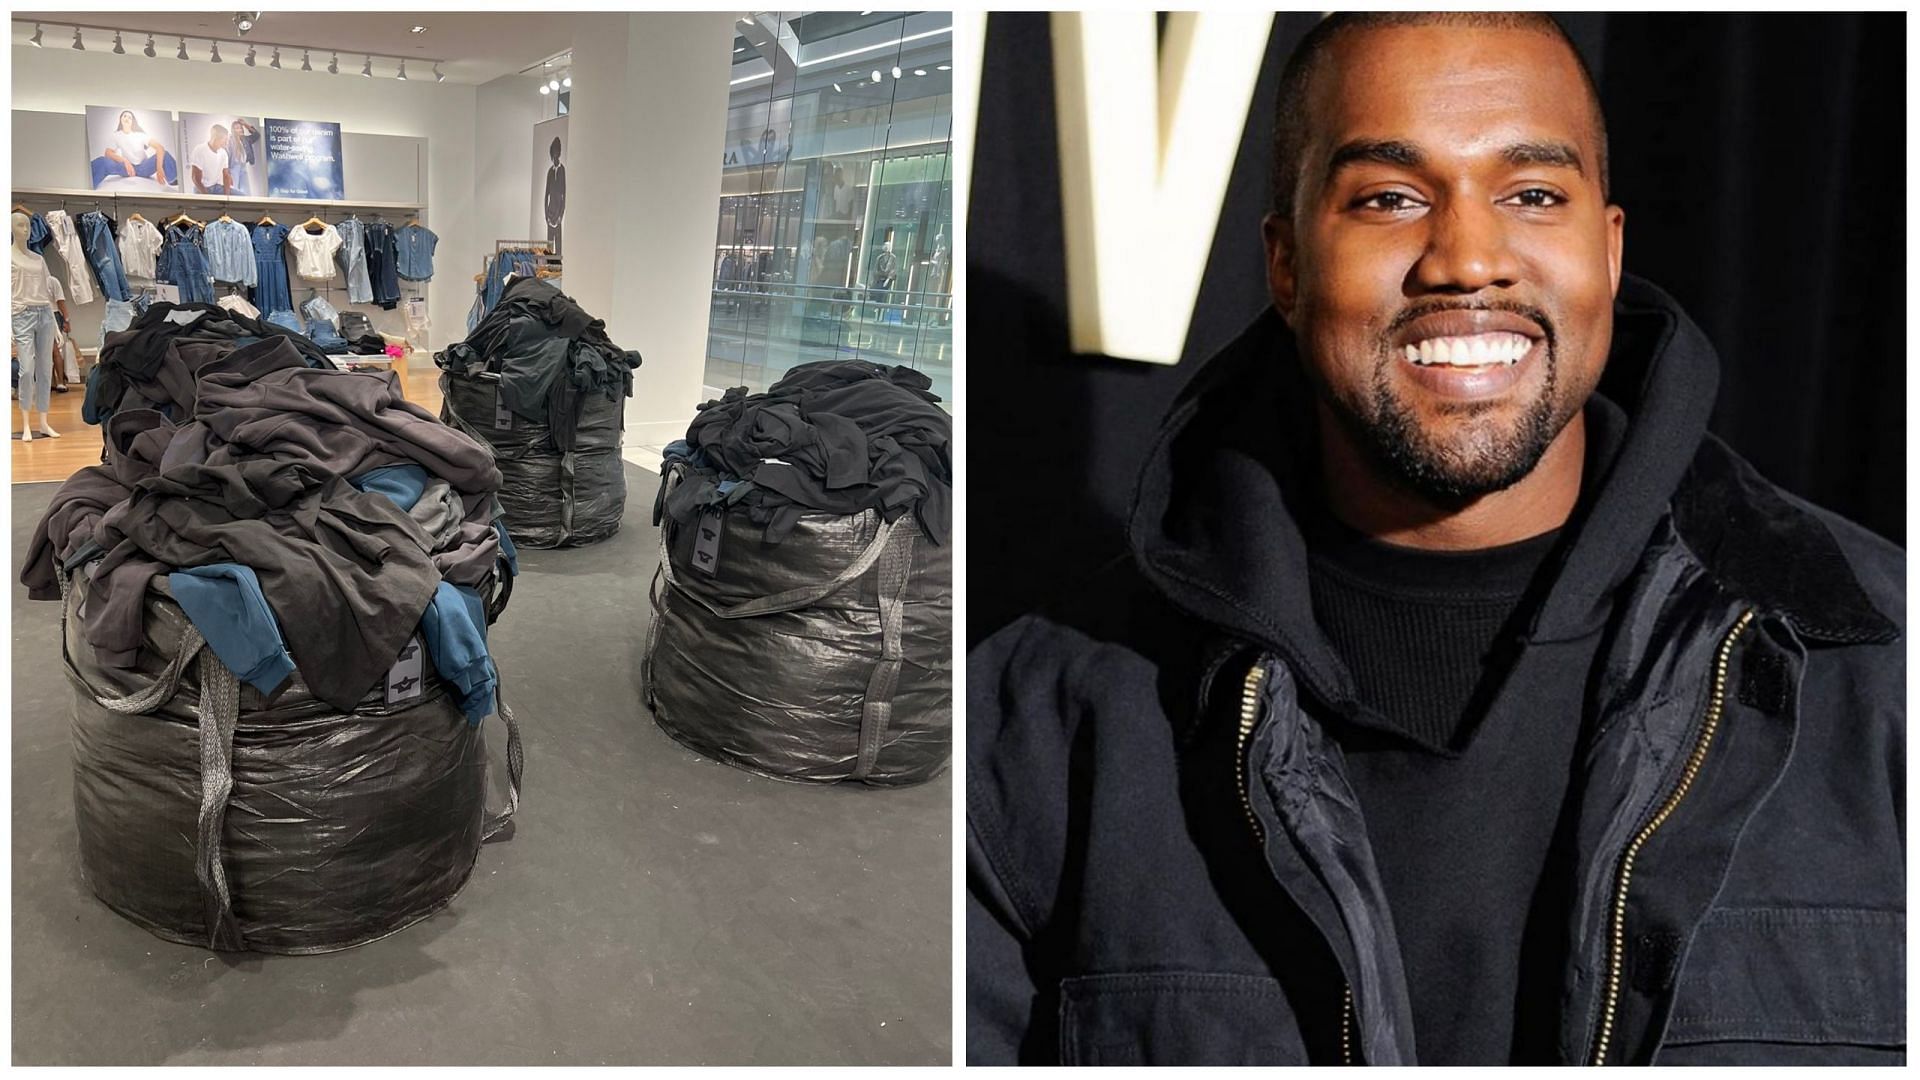 Internet users slam Kanye West for selling clothes from garbage bags (Image via @owen_lang/Twitter and @kanyethegoatwest/Instagram)